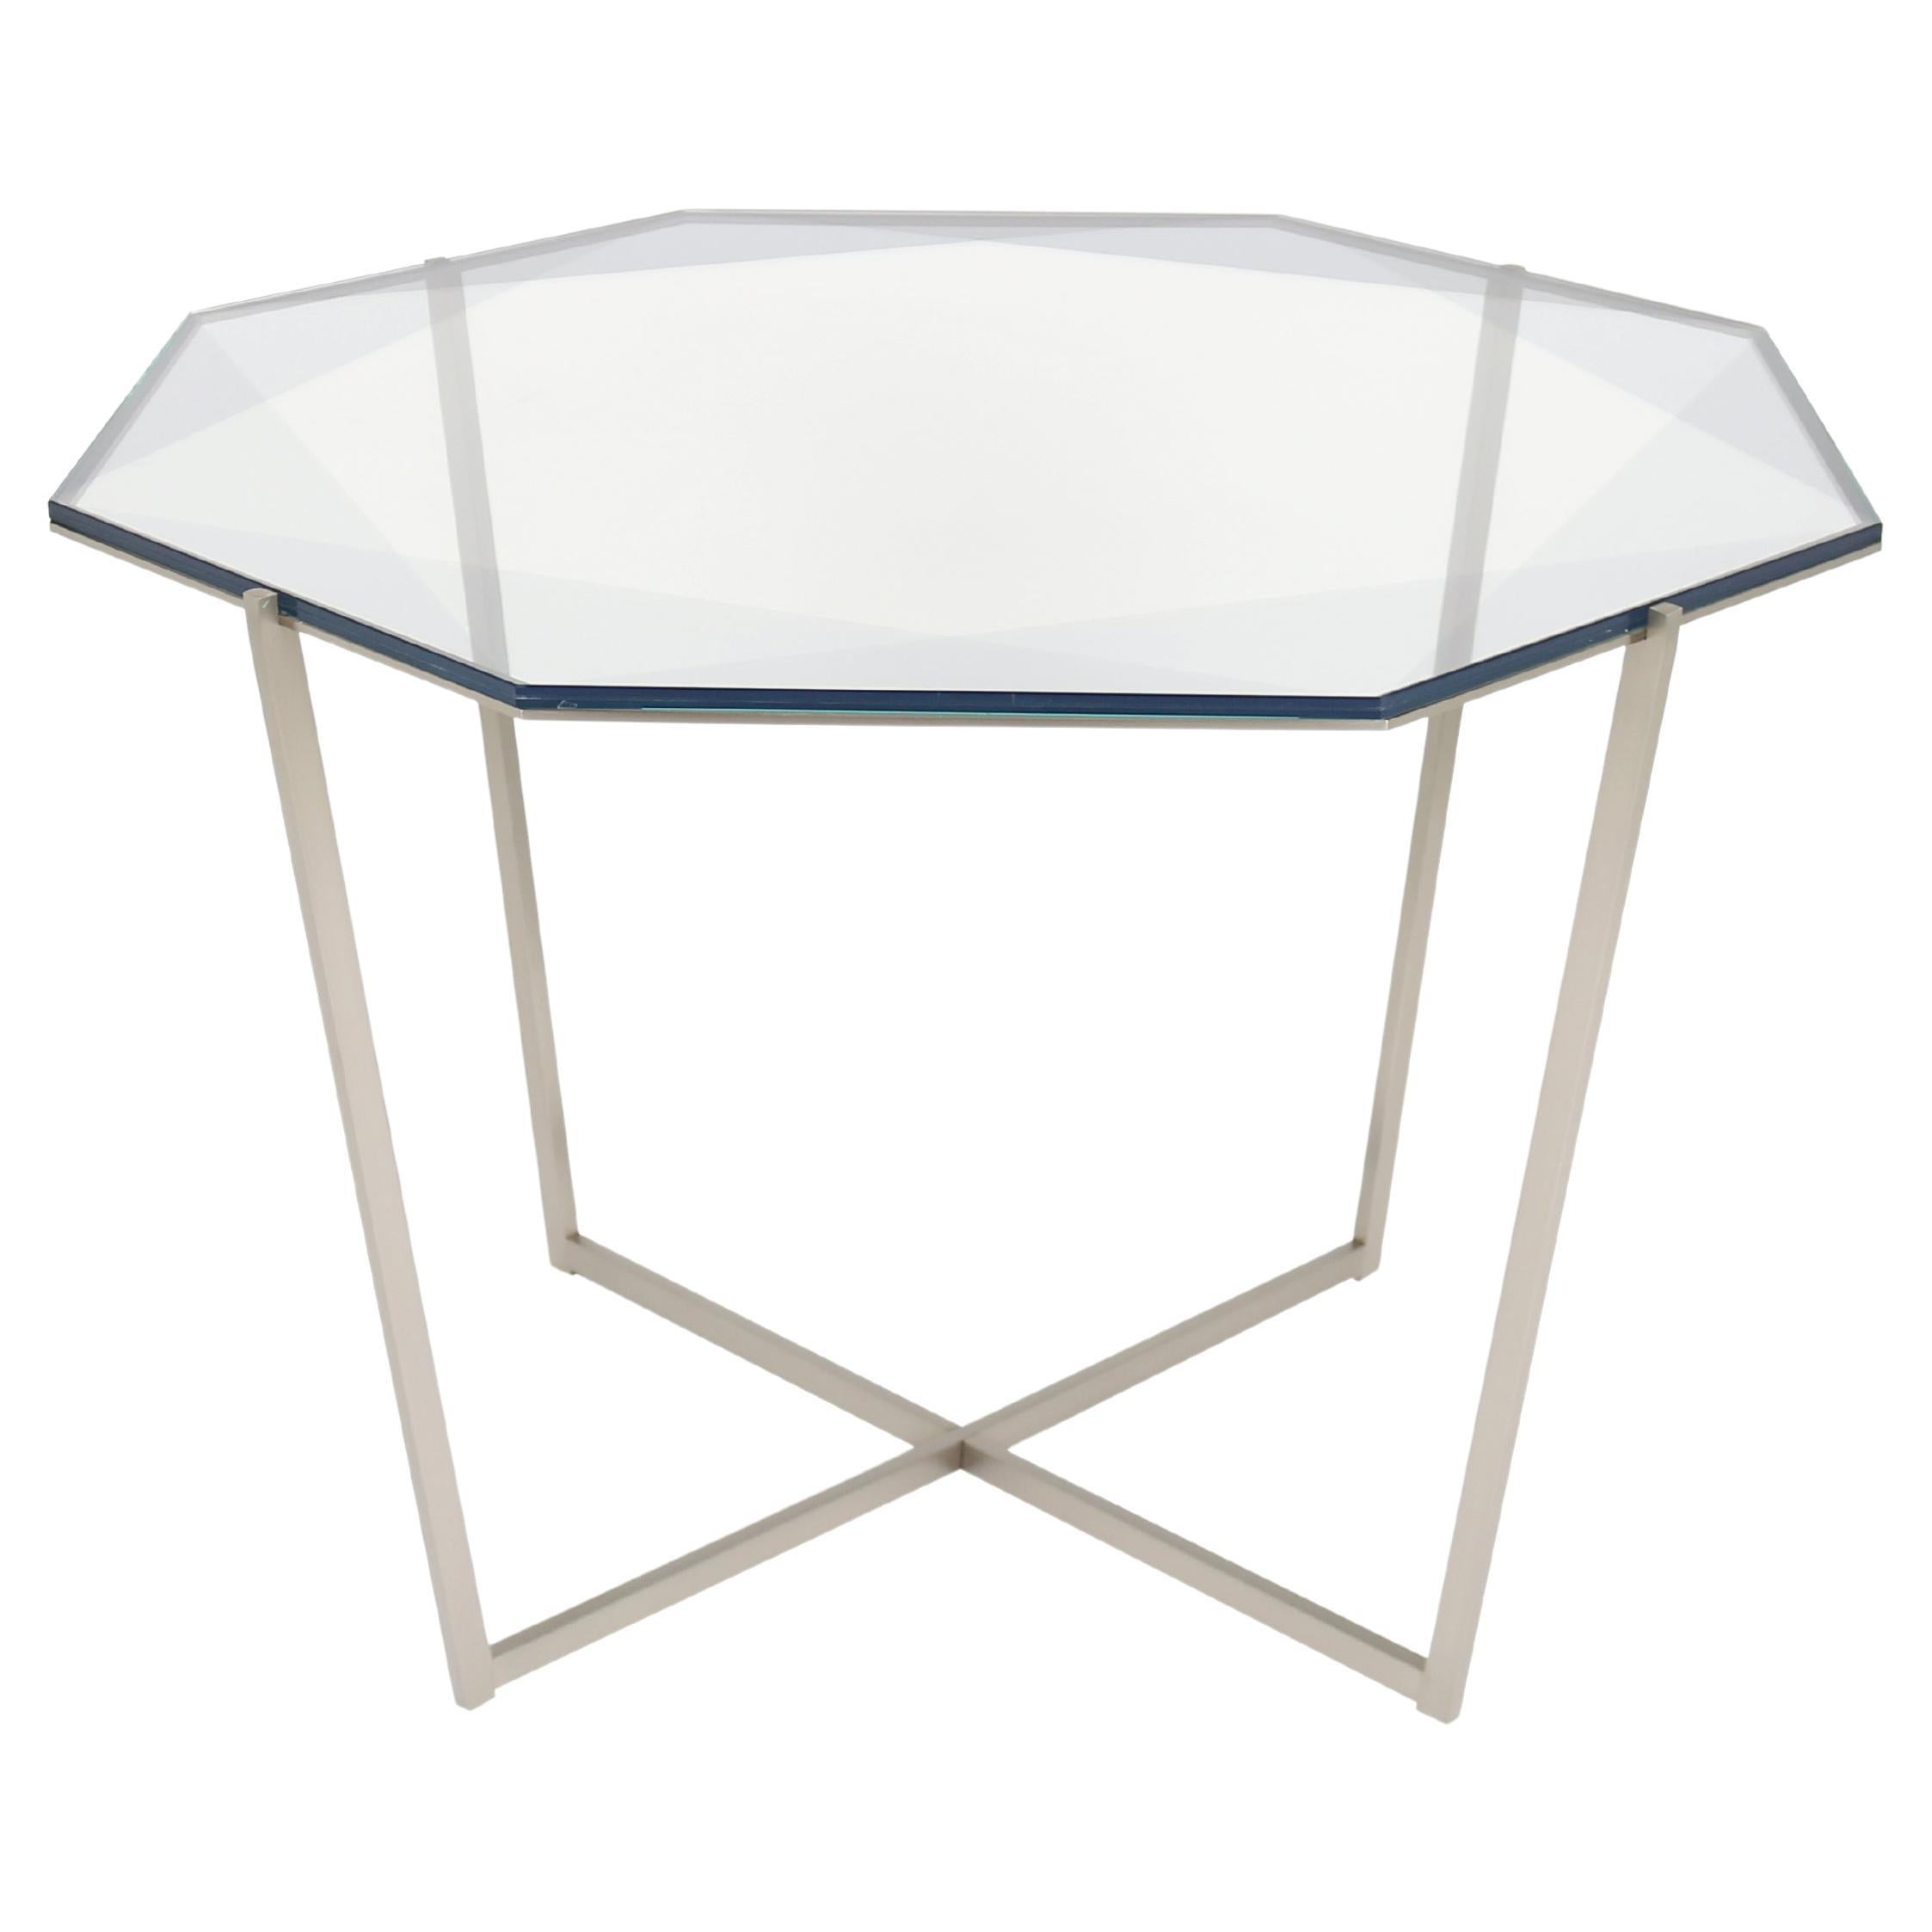 Gem Octagonal Dining Table/Entry Table-Gray Glass with Steel Base by Debra Folz